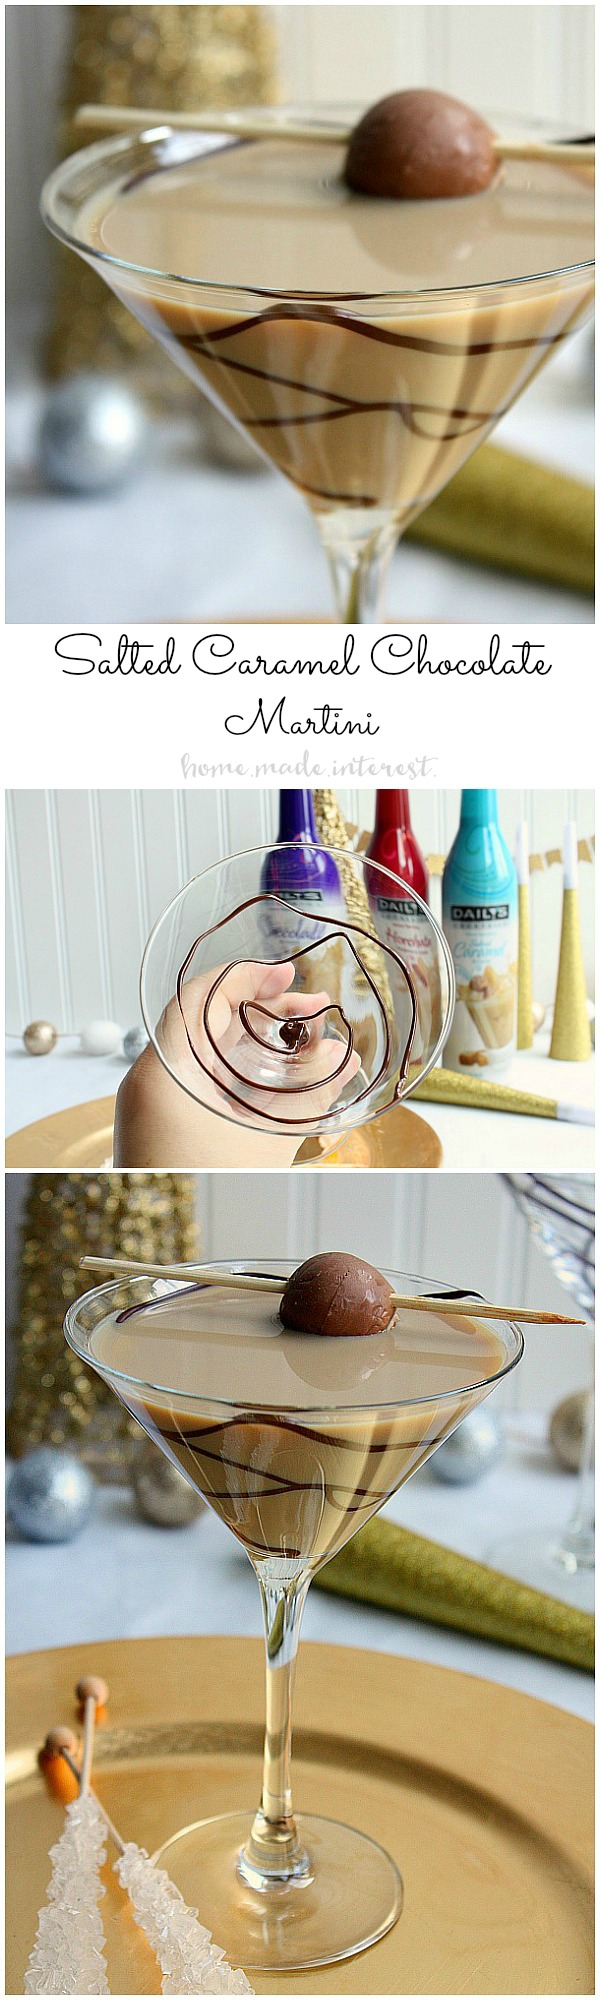 Throw a Bling New Year’s Eve party and make this simple martini recipe for a Salted Caramel Chocolate martini as your signature drink!